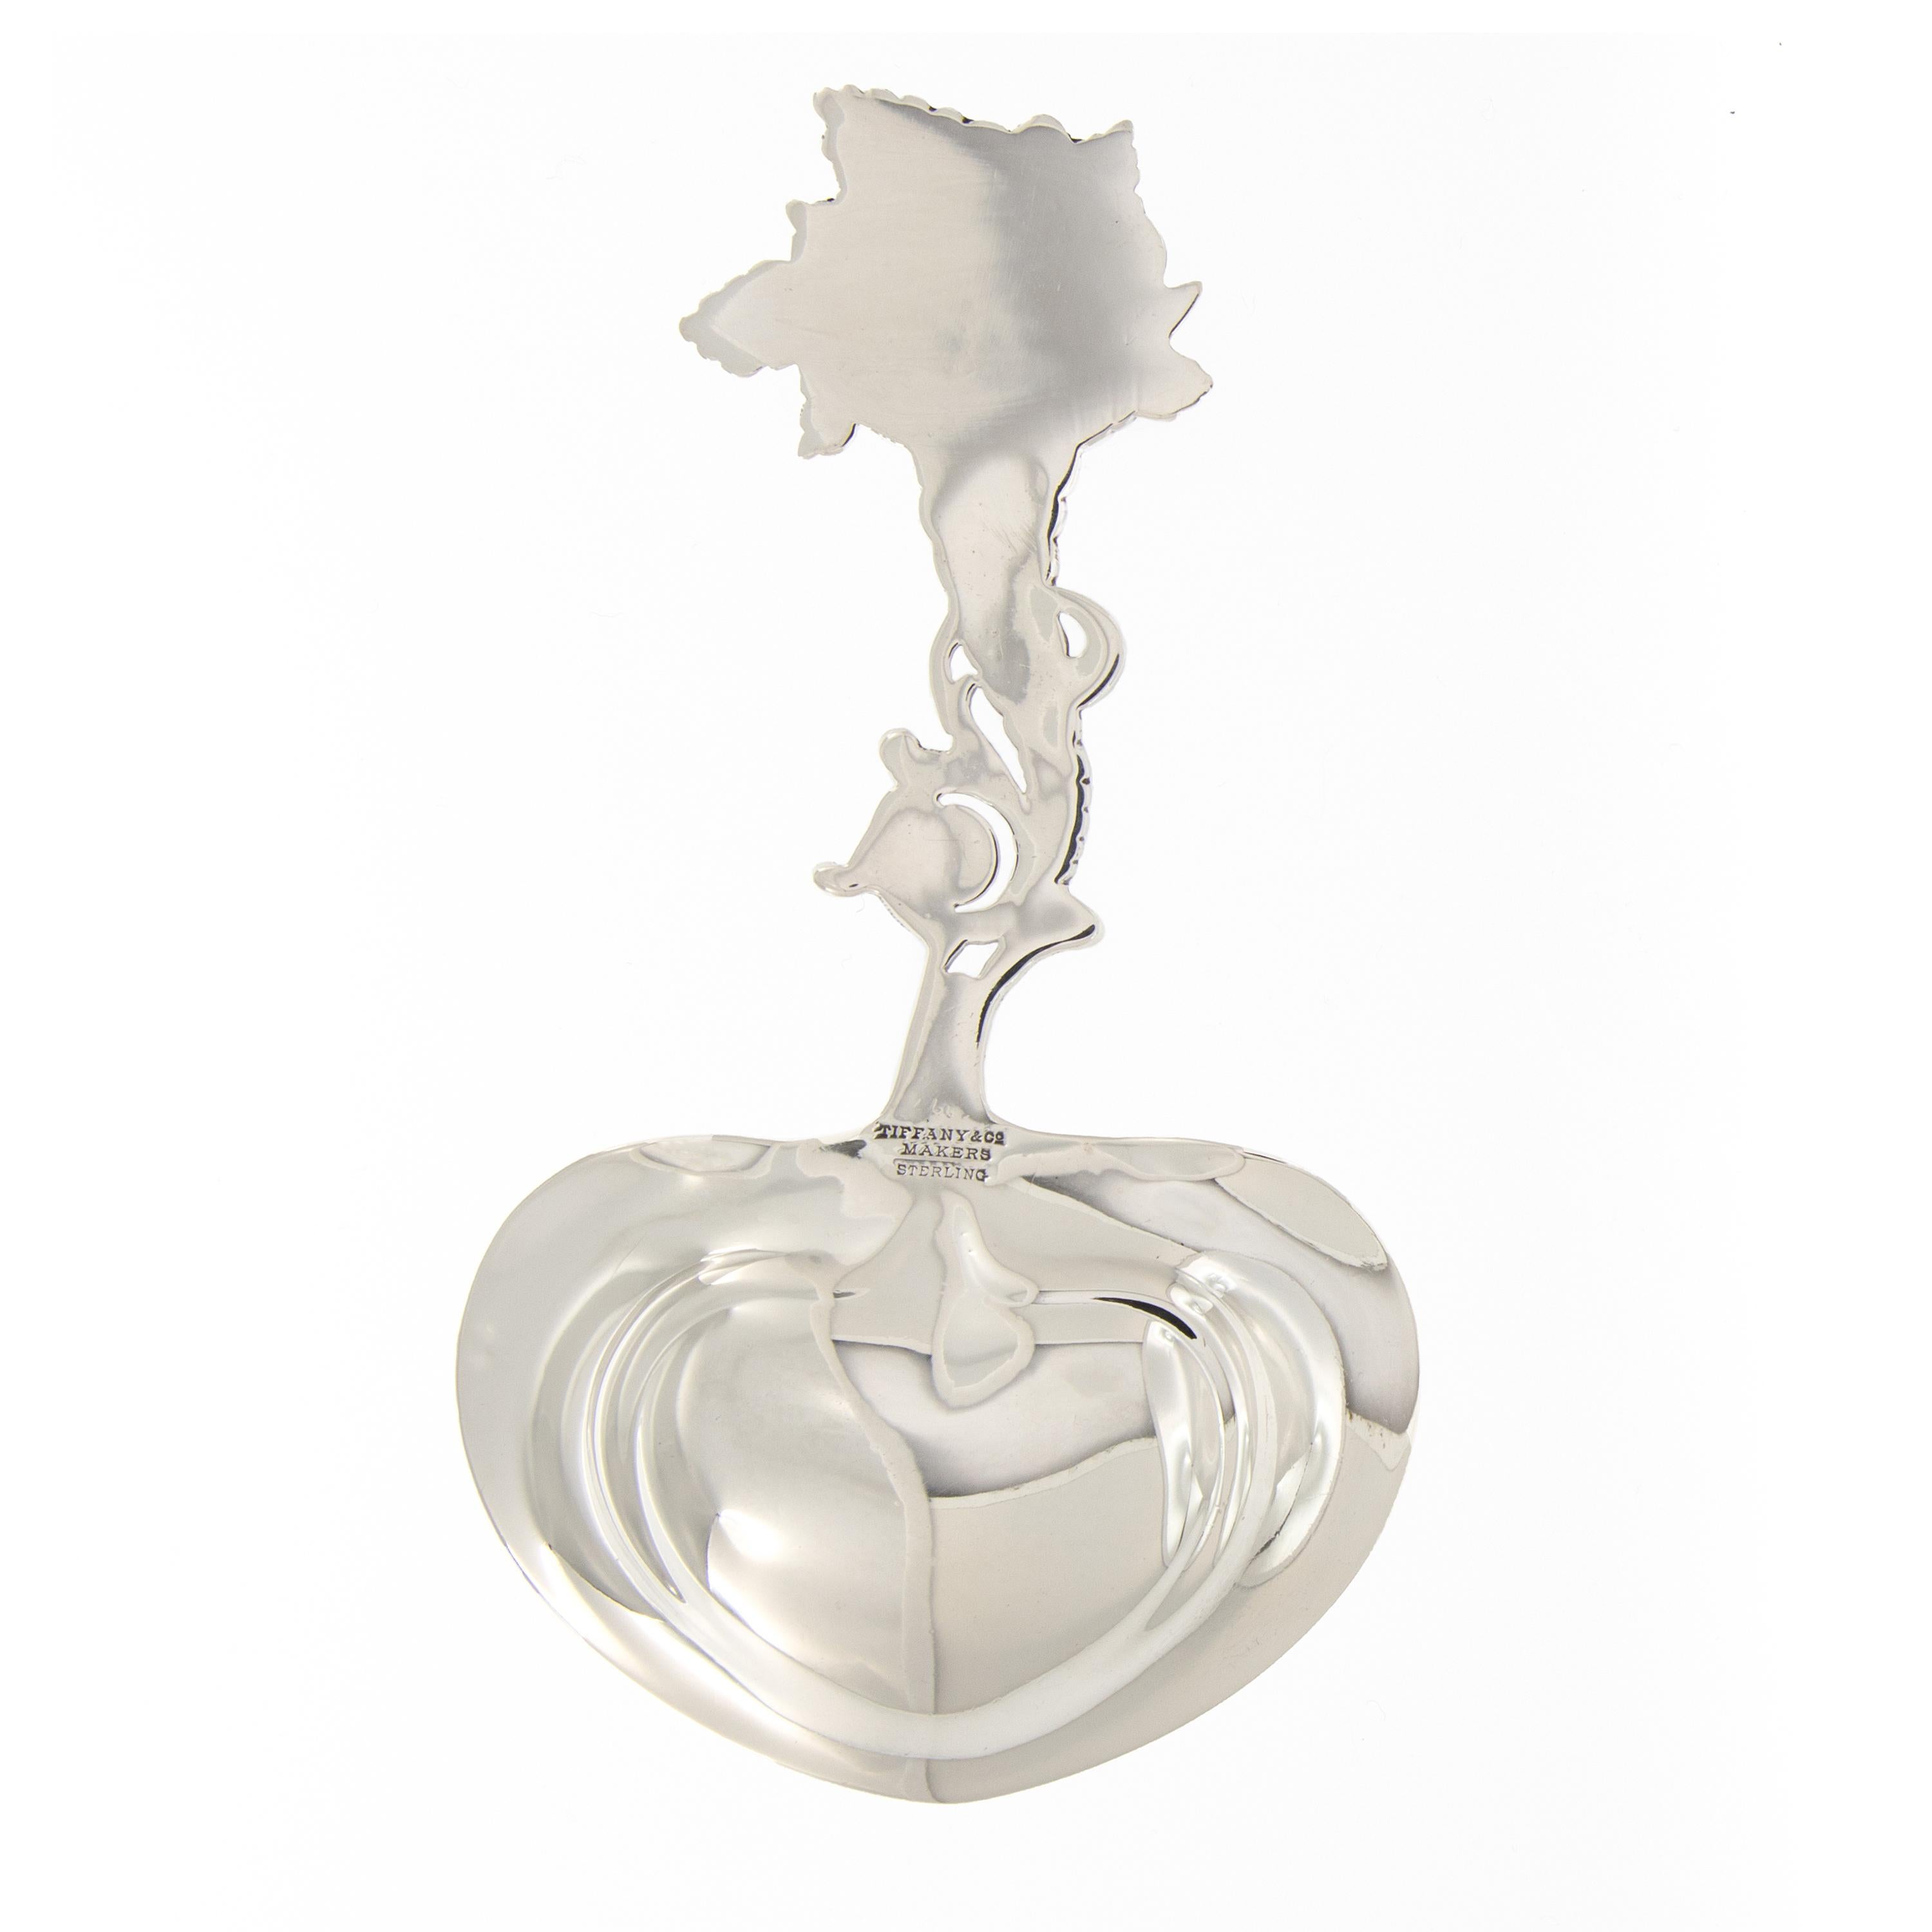 Awaiting your purchase is a rare and magnificent sterling silver Art Nouveau bonbon or tea caddy spoon with heart-shaped bowl made by the silversmiths Tiffany & Co. of New York, New York, in a delightful Cornucopia of Fruit pattern, under the